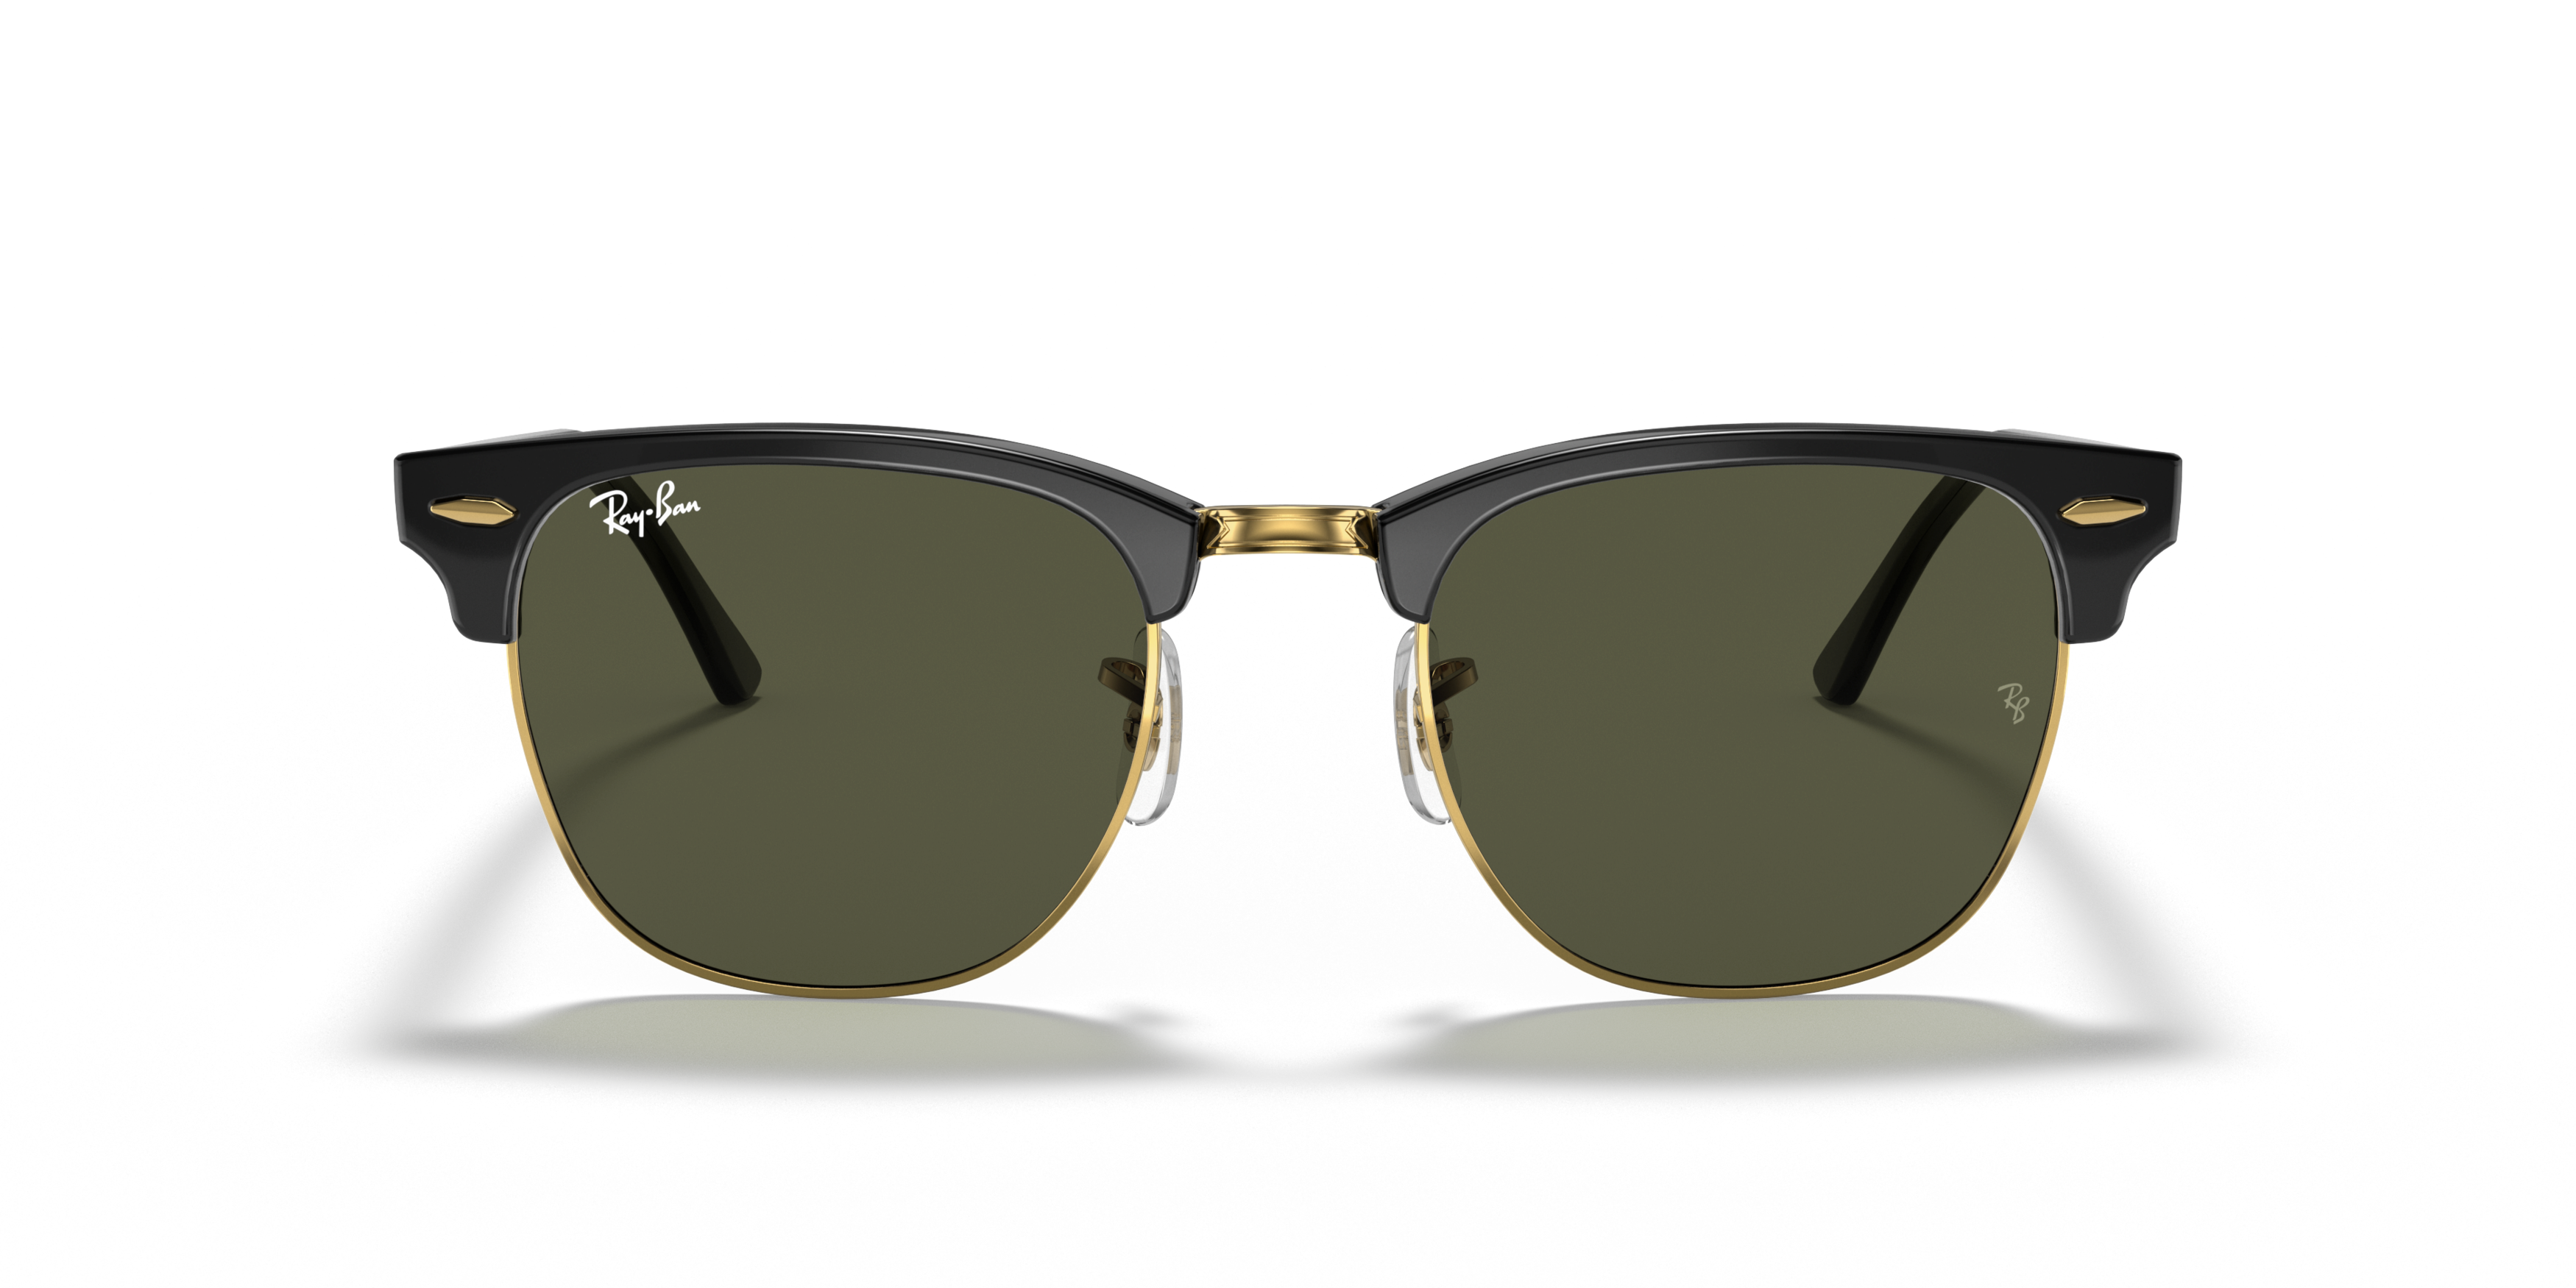 [products.image.front] Ray-Ban Clubmaster Classic RB3016 W0365